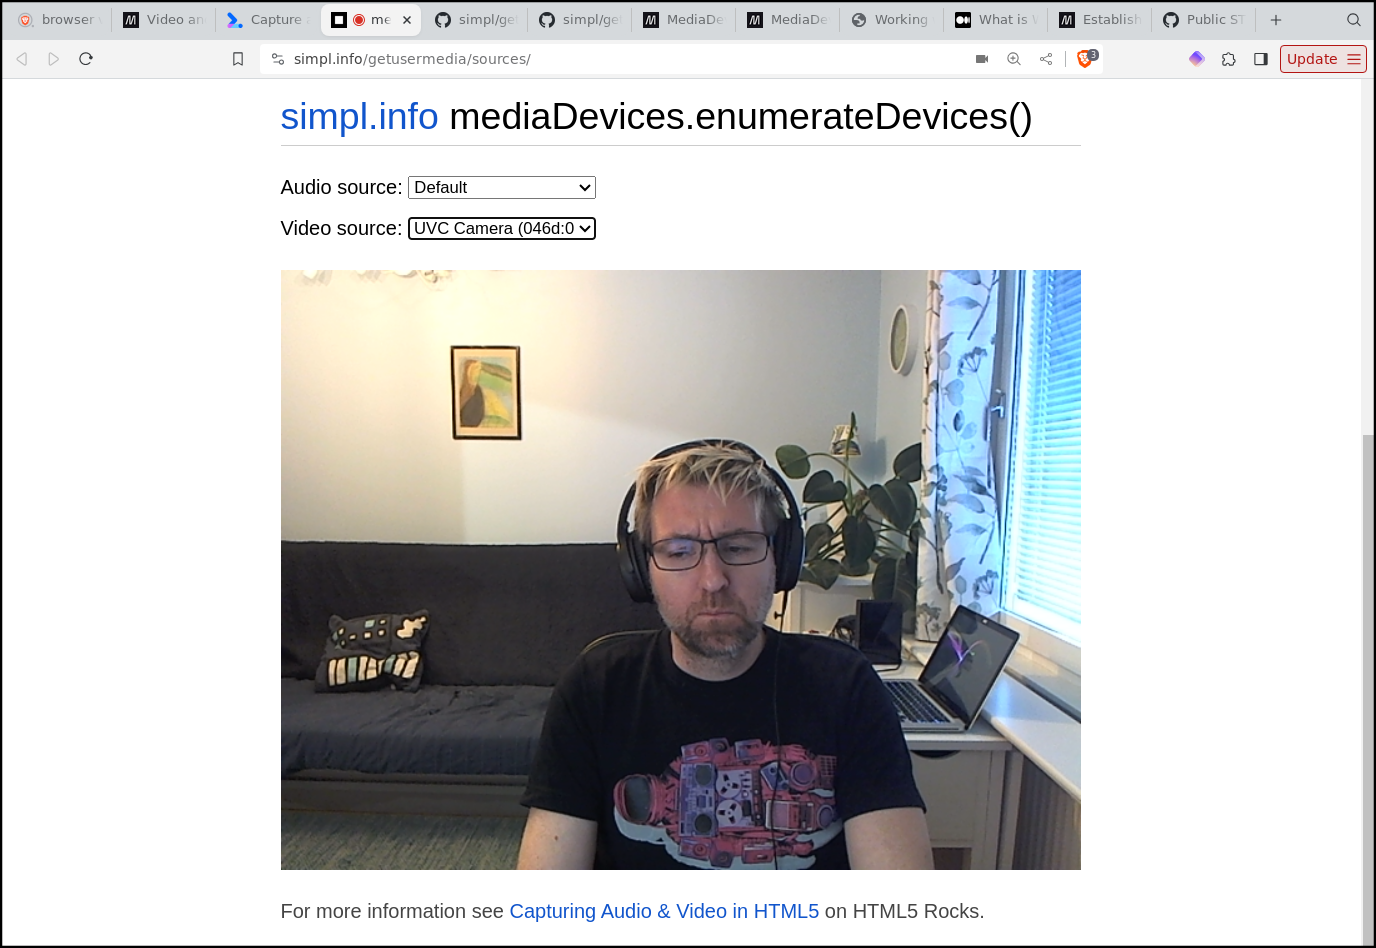 Screenshot of a browser window showing Sam Dutton's mediaDevices demo